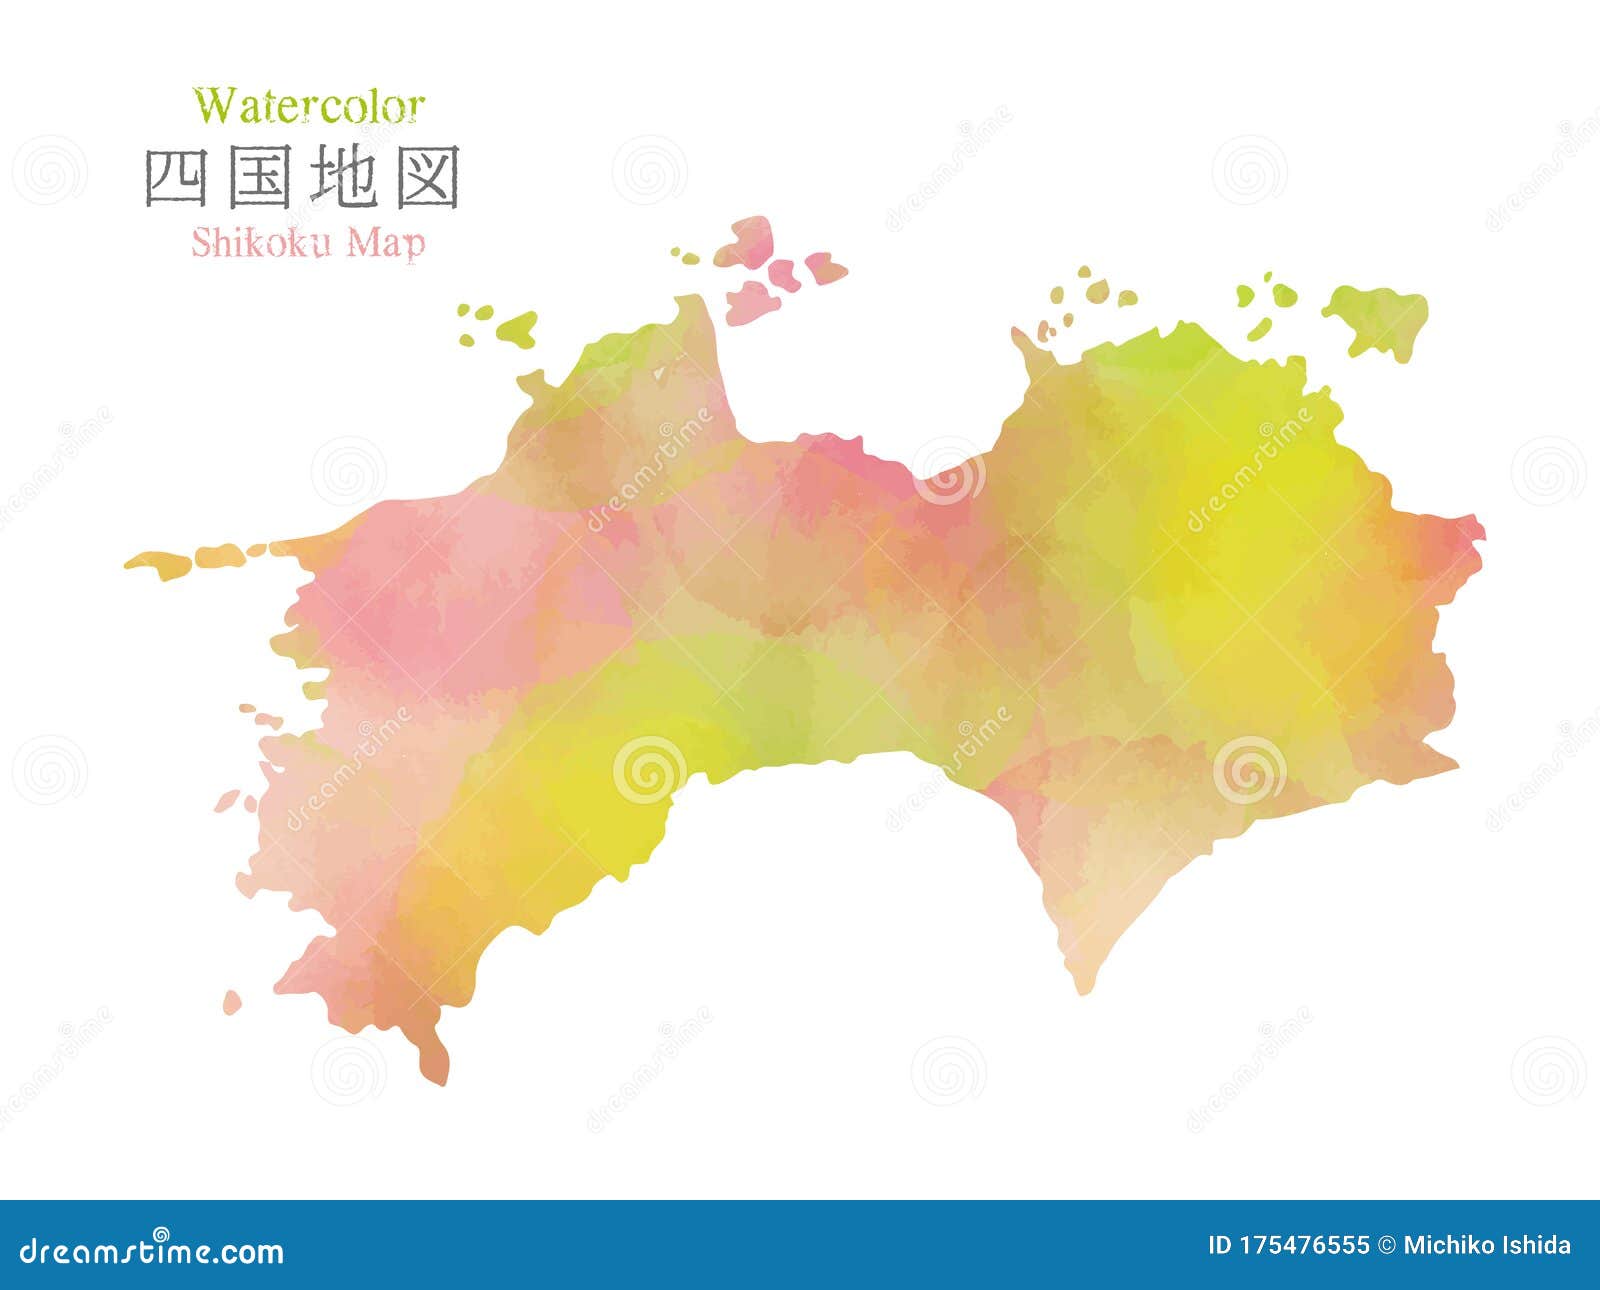 japan shikoku region map with watercolor texture